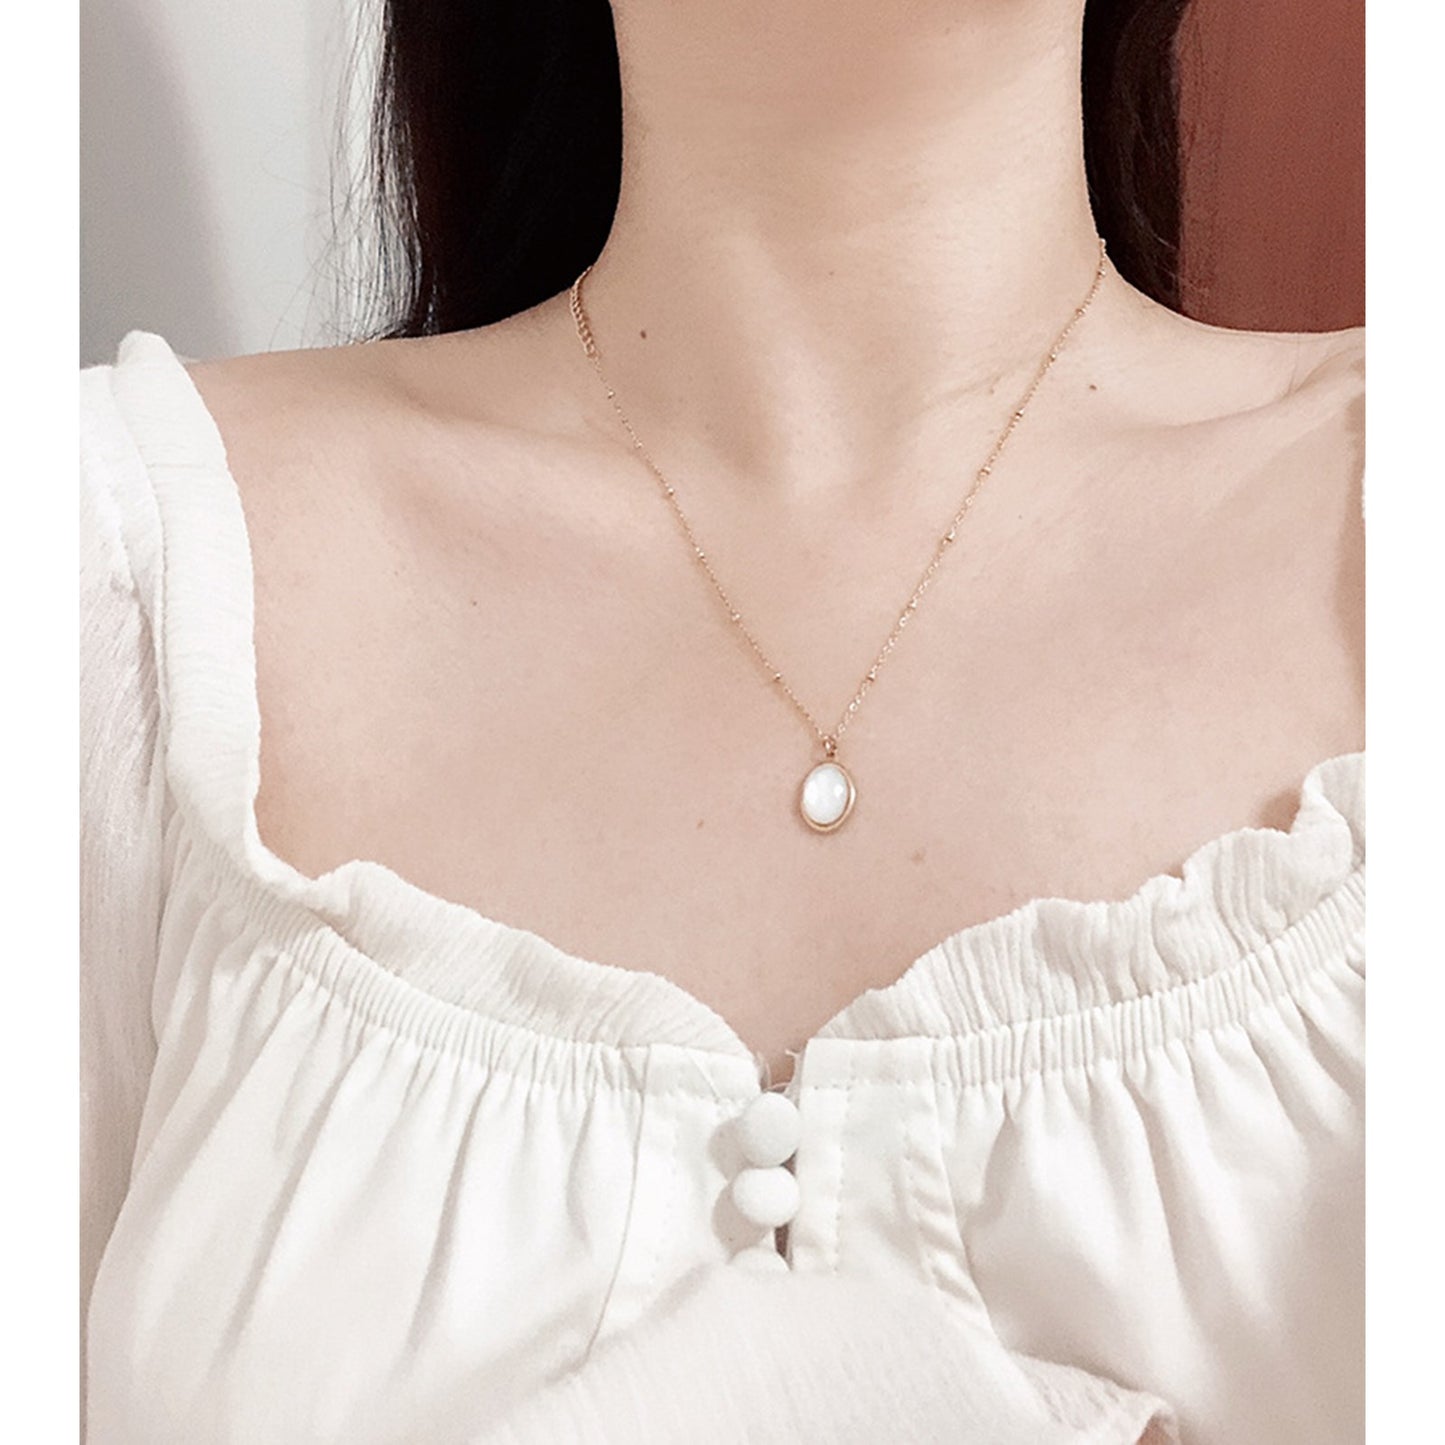 Mother of Pearl Oval Necklace - Pantsnsox